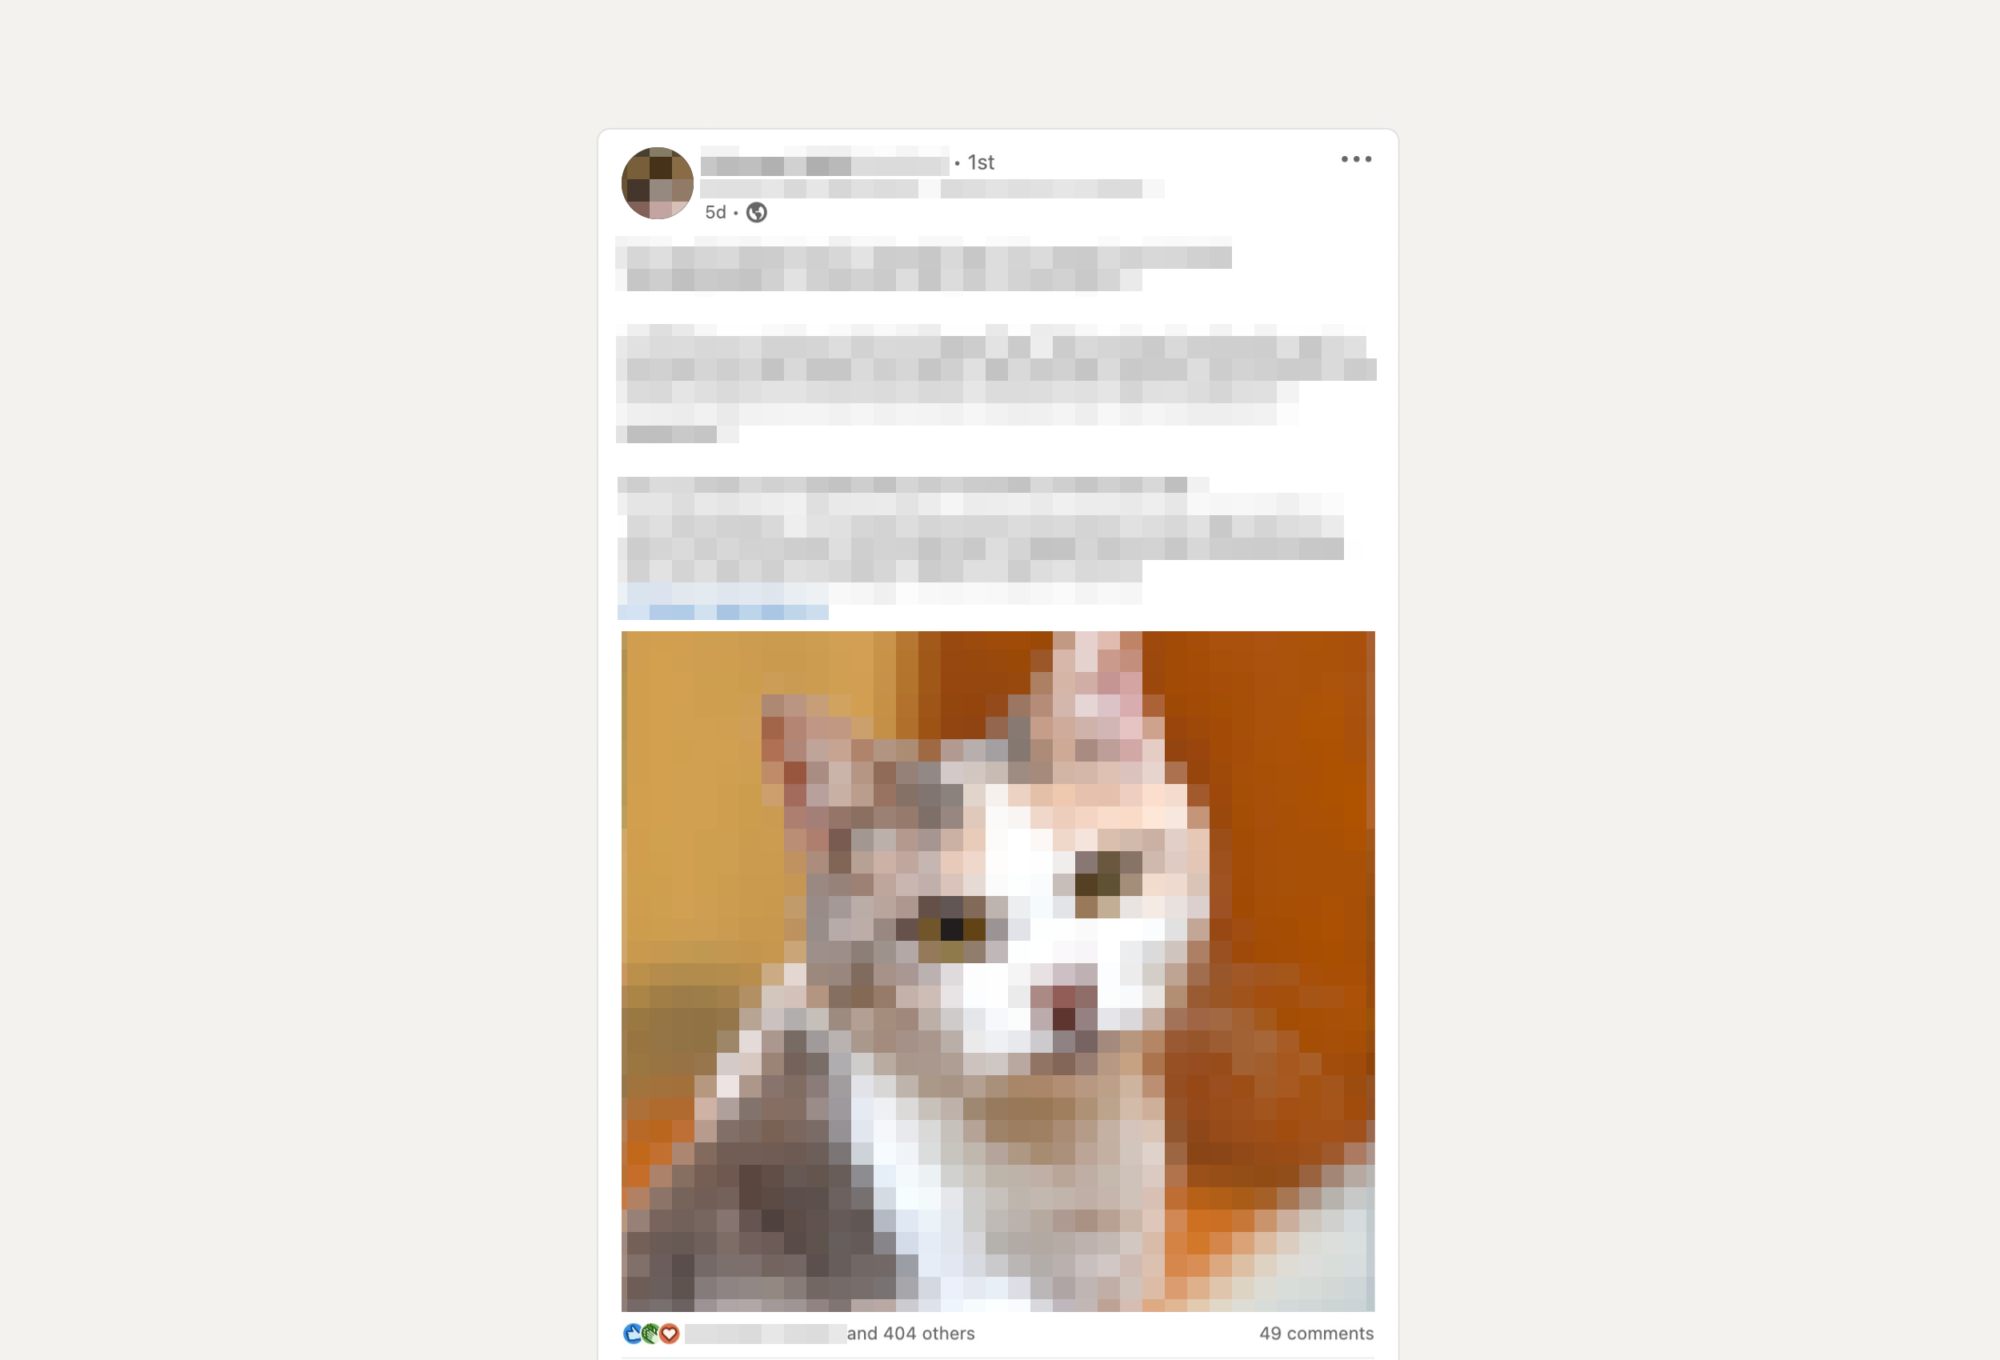 A screenshot of another LinkedIn post with all text and imagery blanked out. We will come to why you can't read any of it later in the blog post.